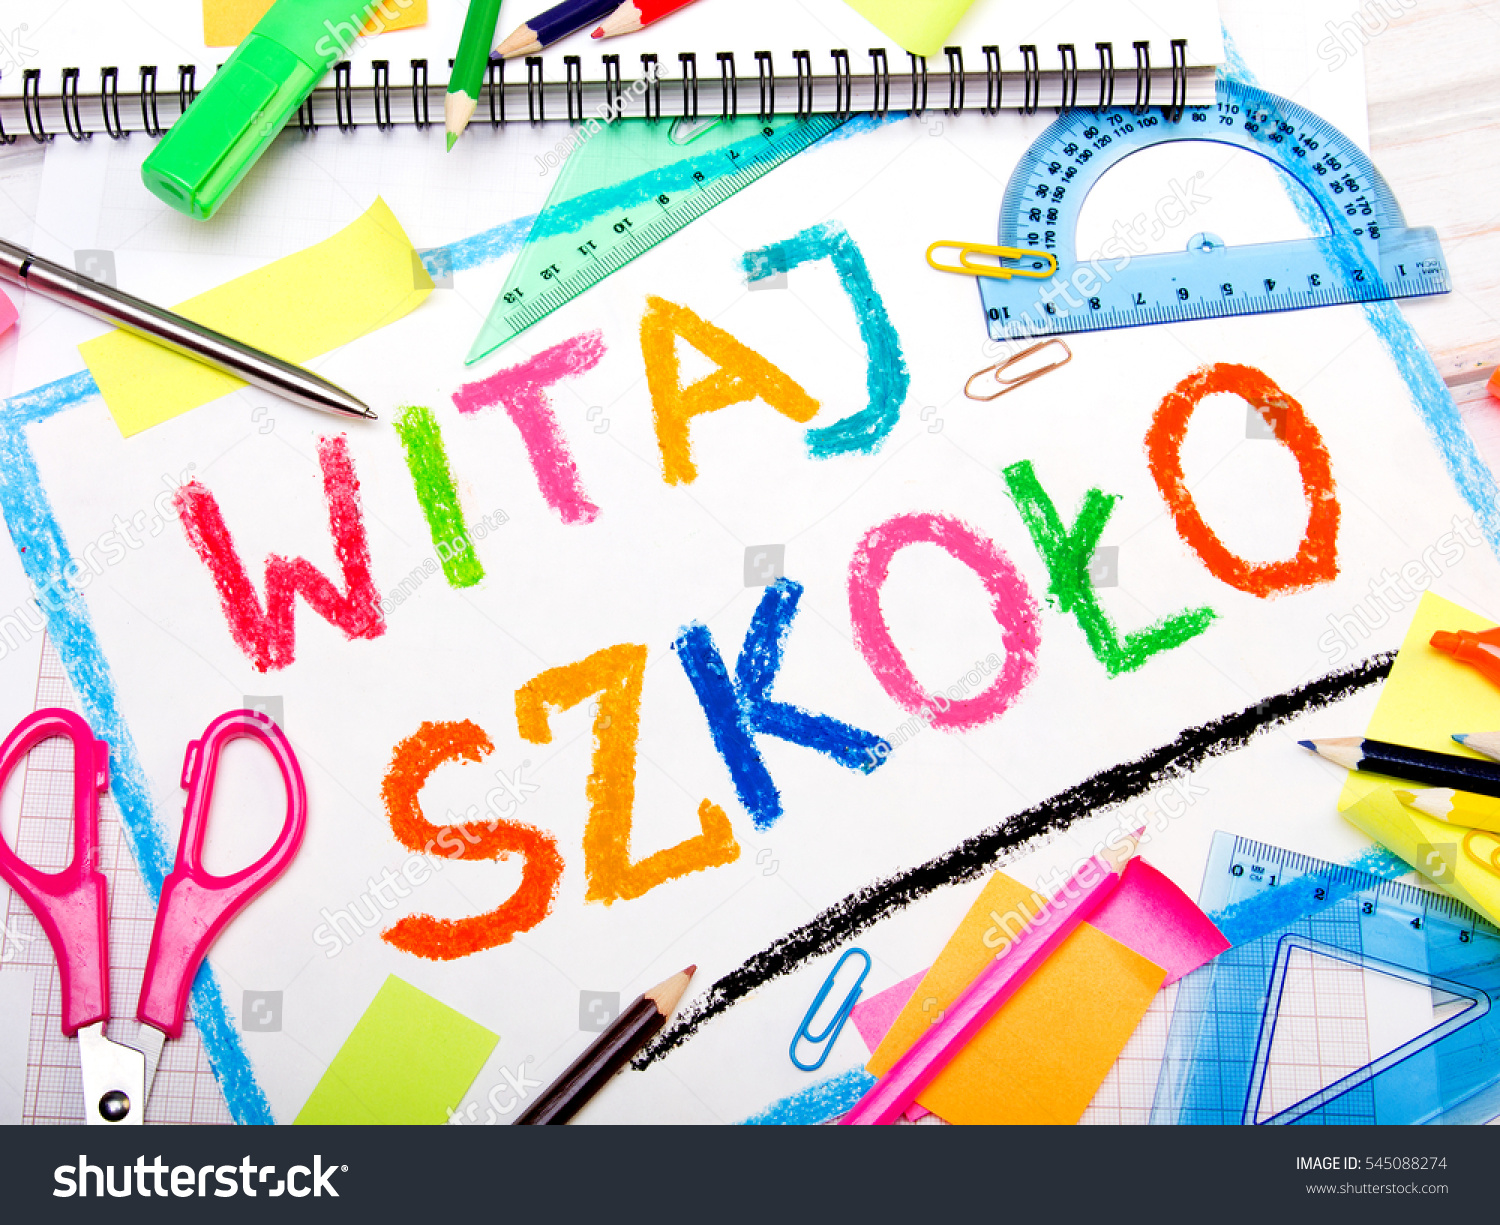 Colorful drawing of the Polish words: 'Welcome back to school' and school accessories #545088274